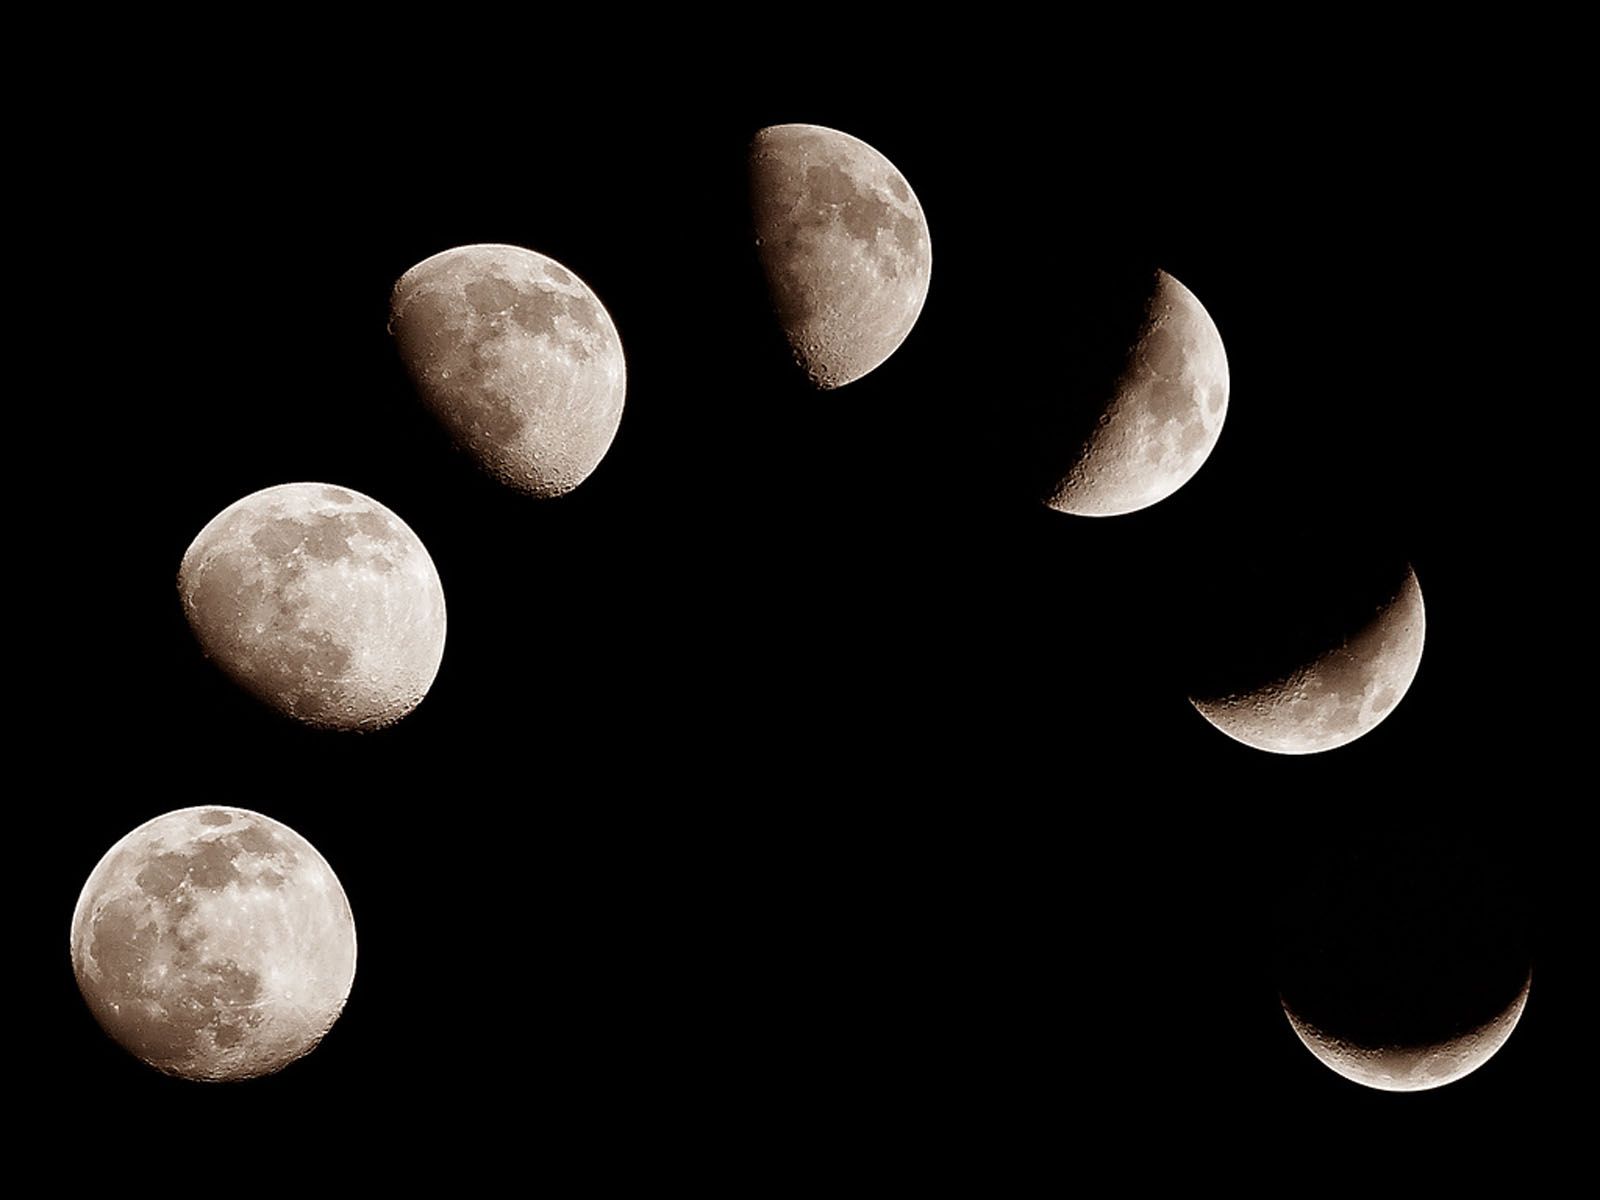 A series of full and new moons - Moon phases